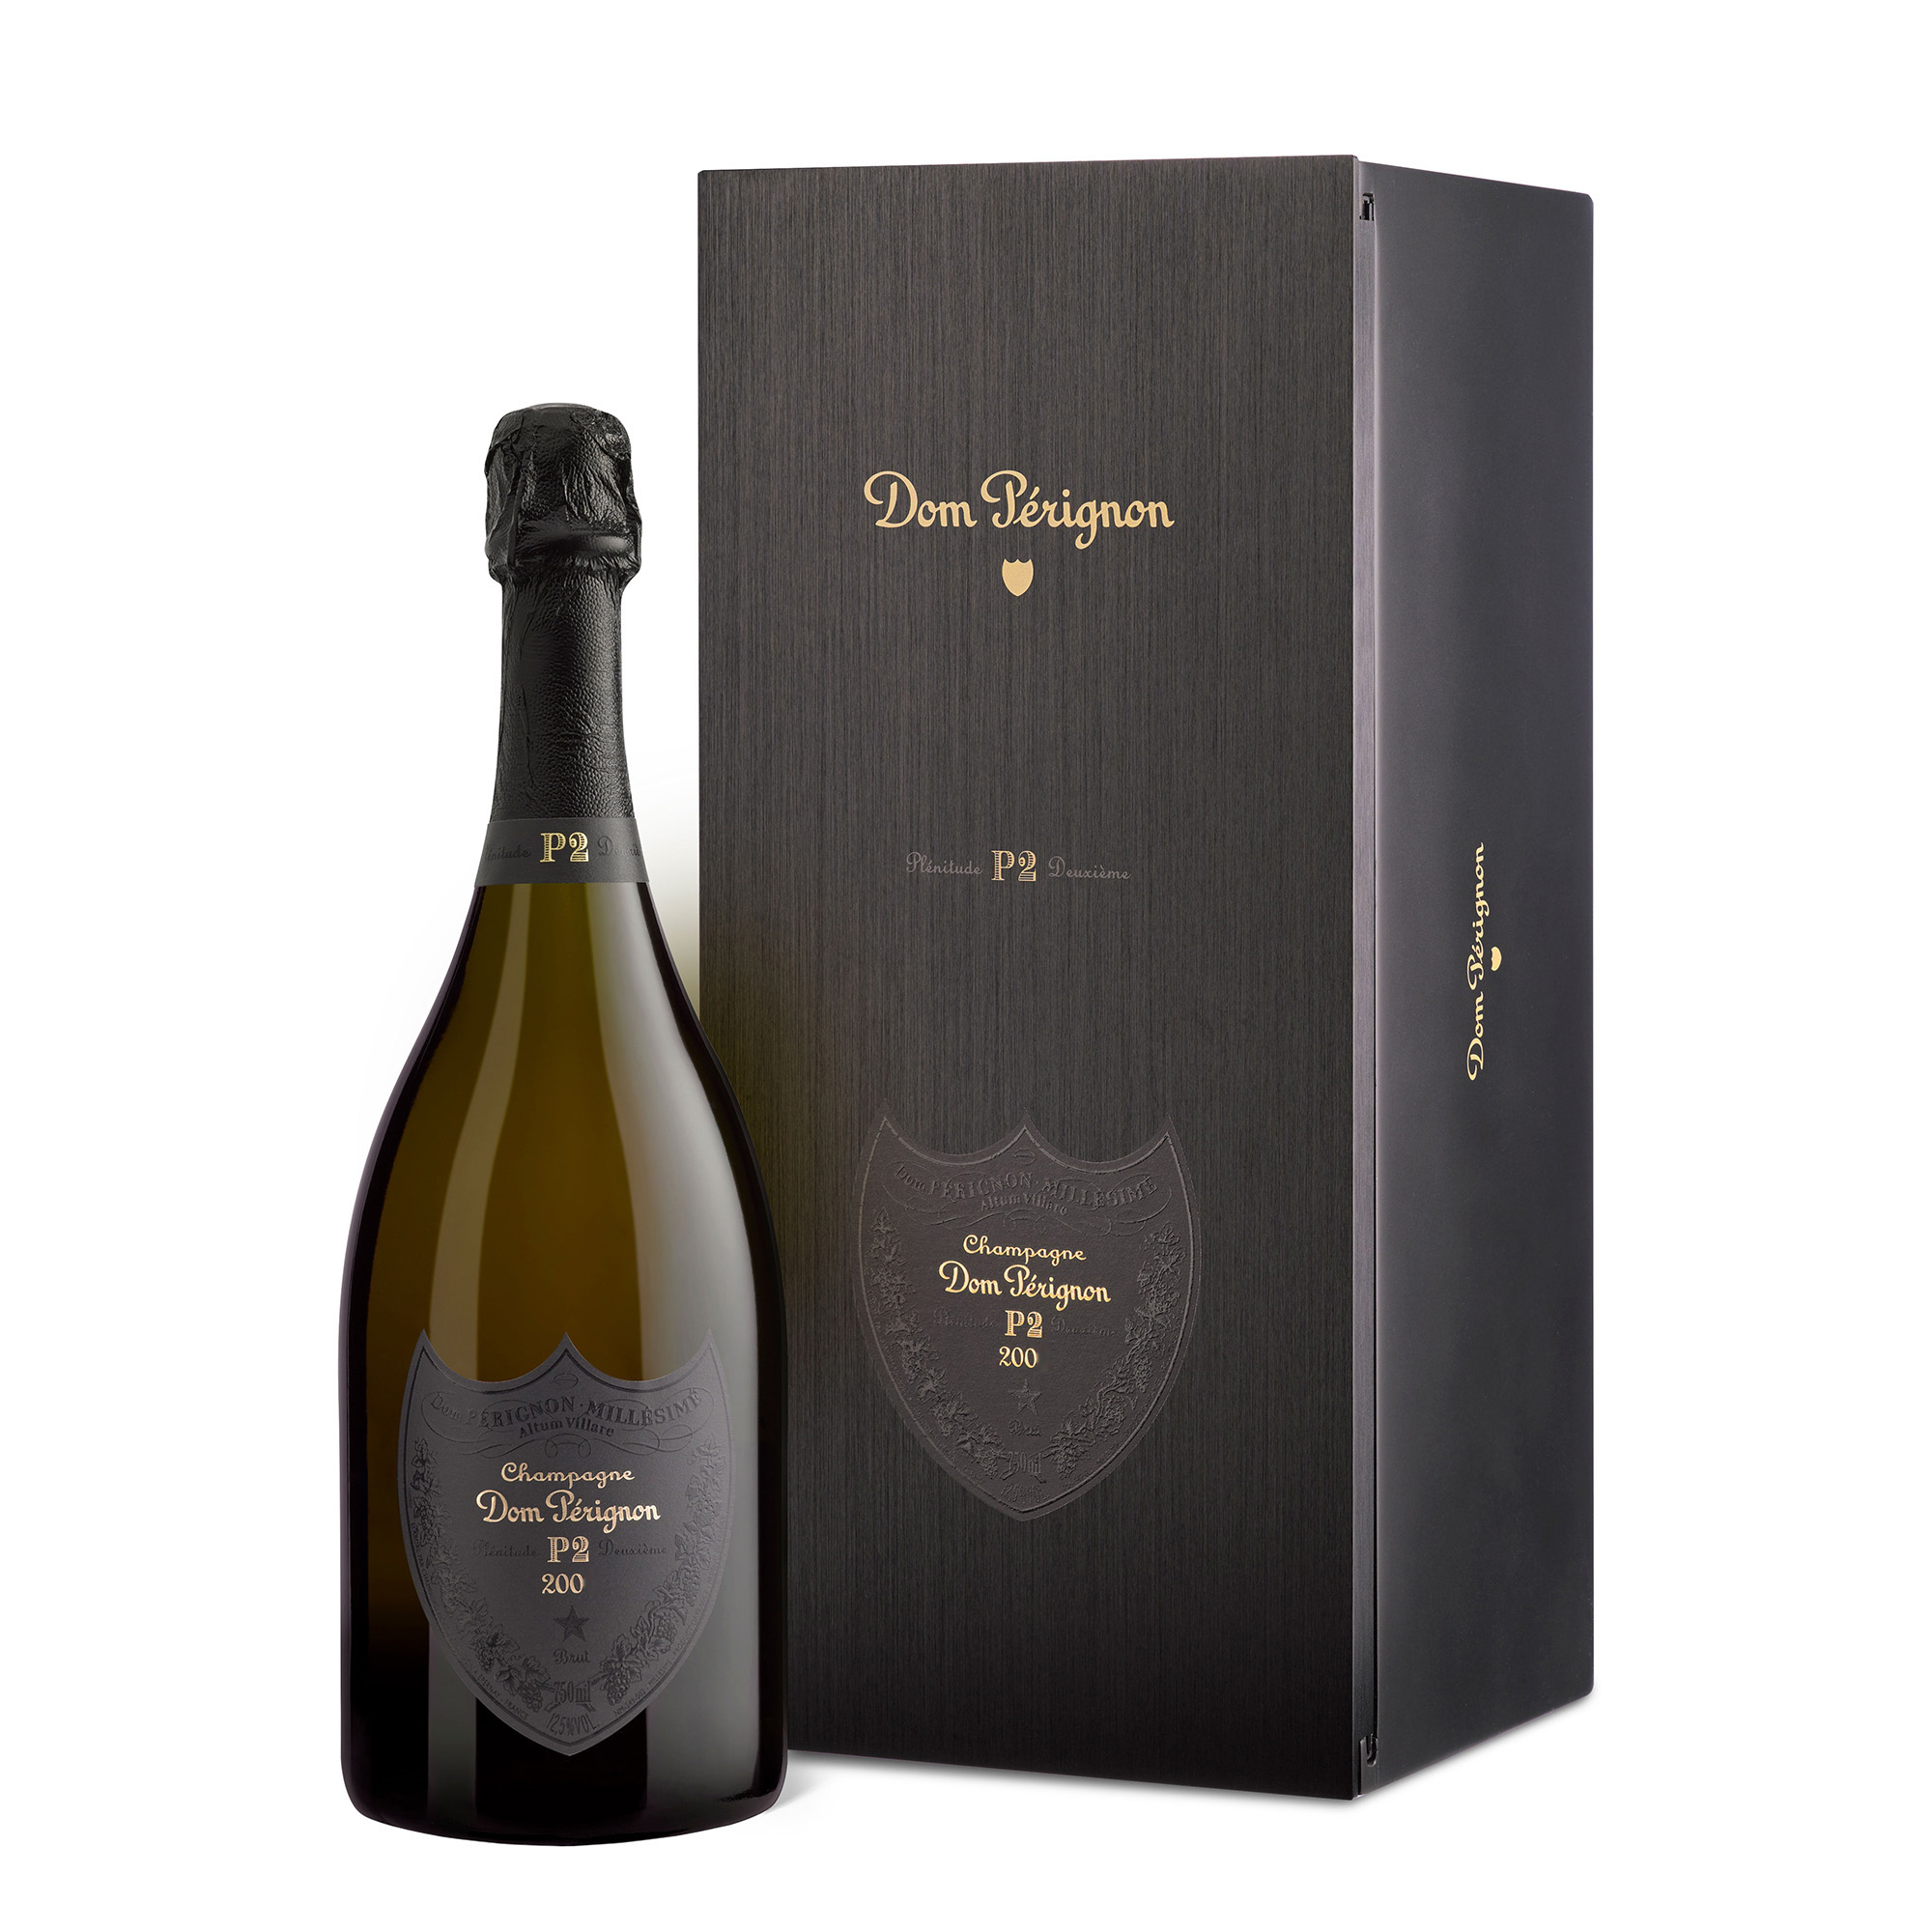 Dom Perignon 2000 Plenitude P2 Vintage 75cl Gift Boxed champagne for home delivery